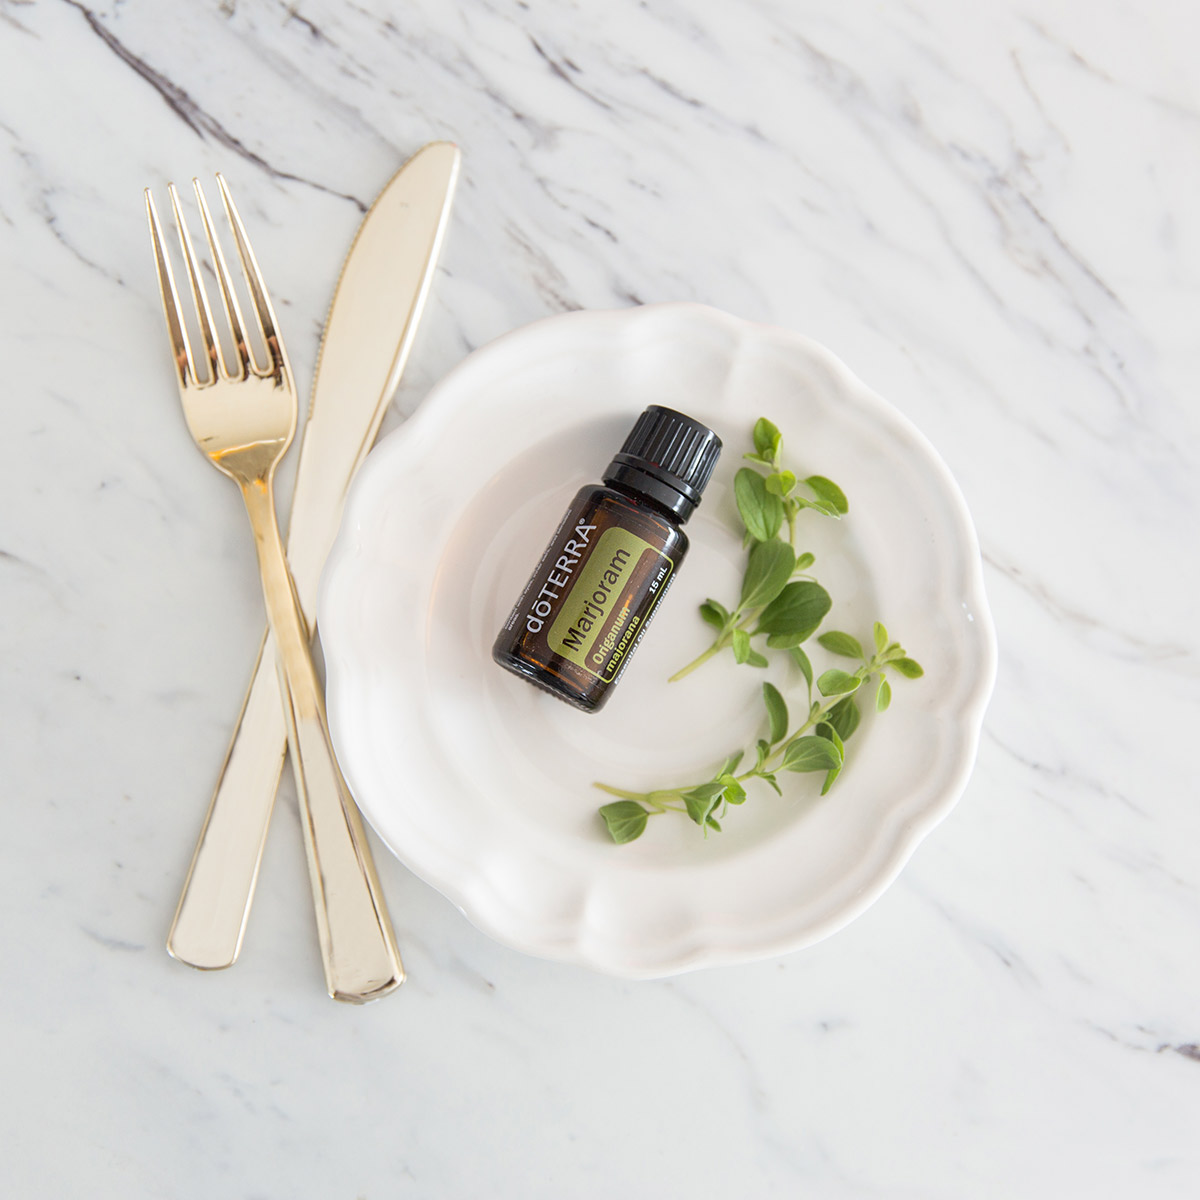 Bottle of Marjoram essential oil on a plate with fresh marjoram leaves, next to a fork and knife. How do I use marjoram essential oil? You can use Marjoram oil for cooking in place of dry marjoram.